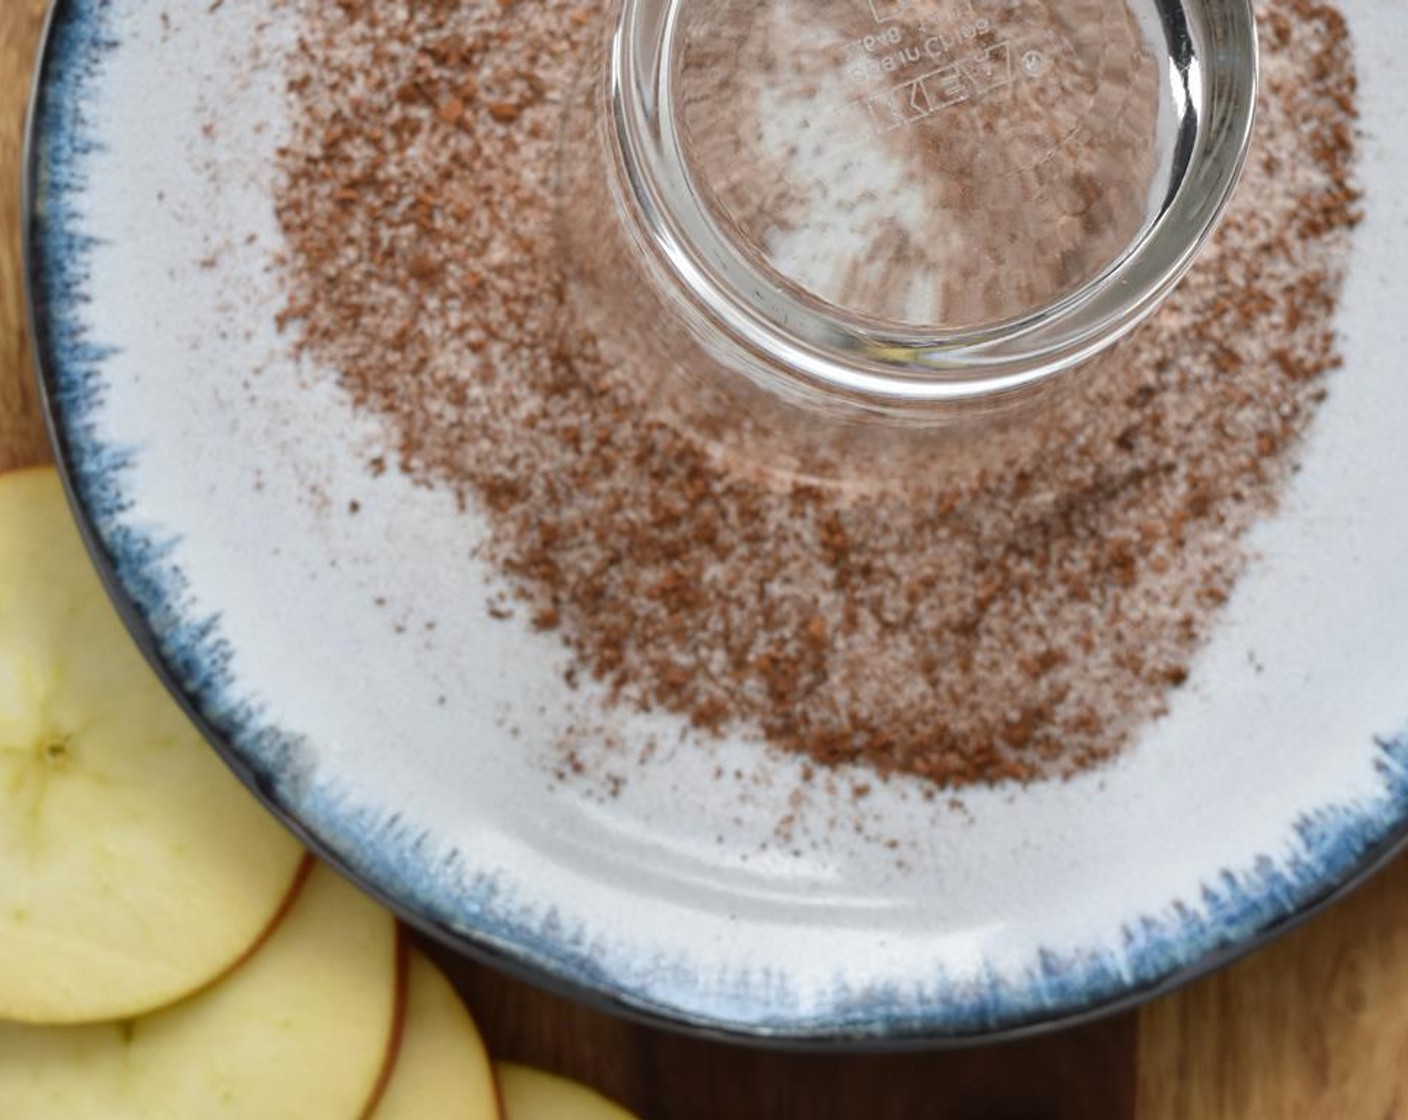 step 4 When you are ready to pour the drinks, thinly slice the Apple (1). Combine Ground Cinnamon (1 tsp) and Granulated Sugar (3 Tbsp) in a dish. Use the lemon rind to dampen the rim of the glasses, then dip them into the dish with the cinnamon and sugar.